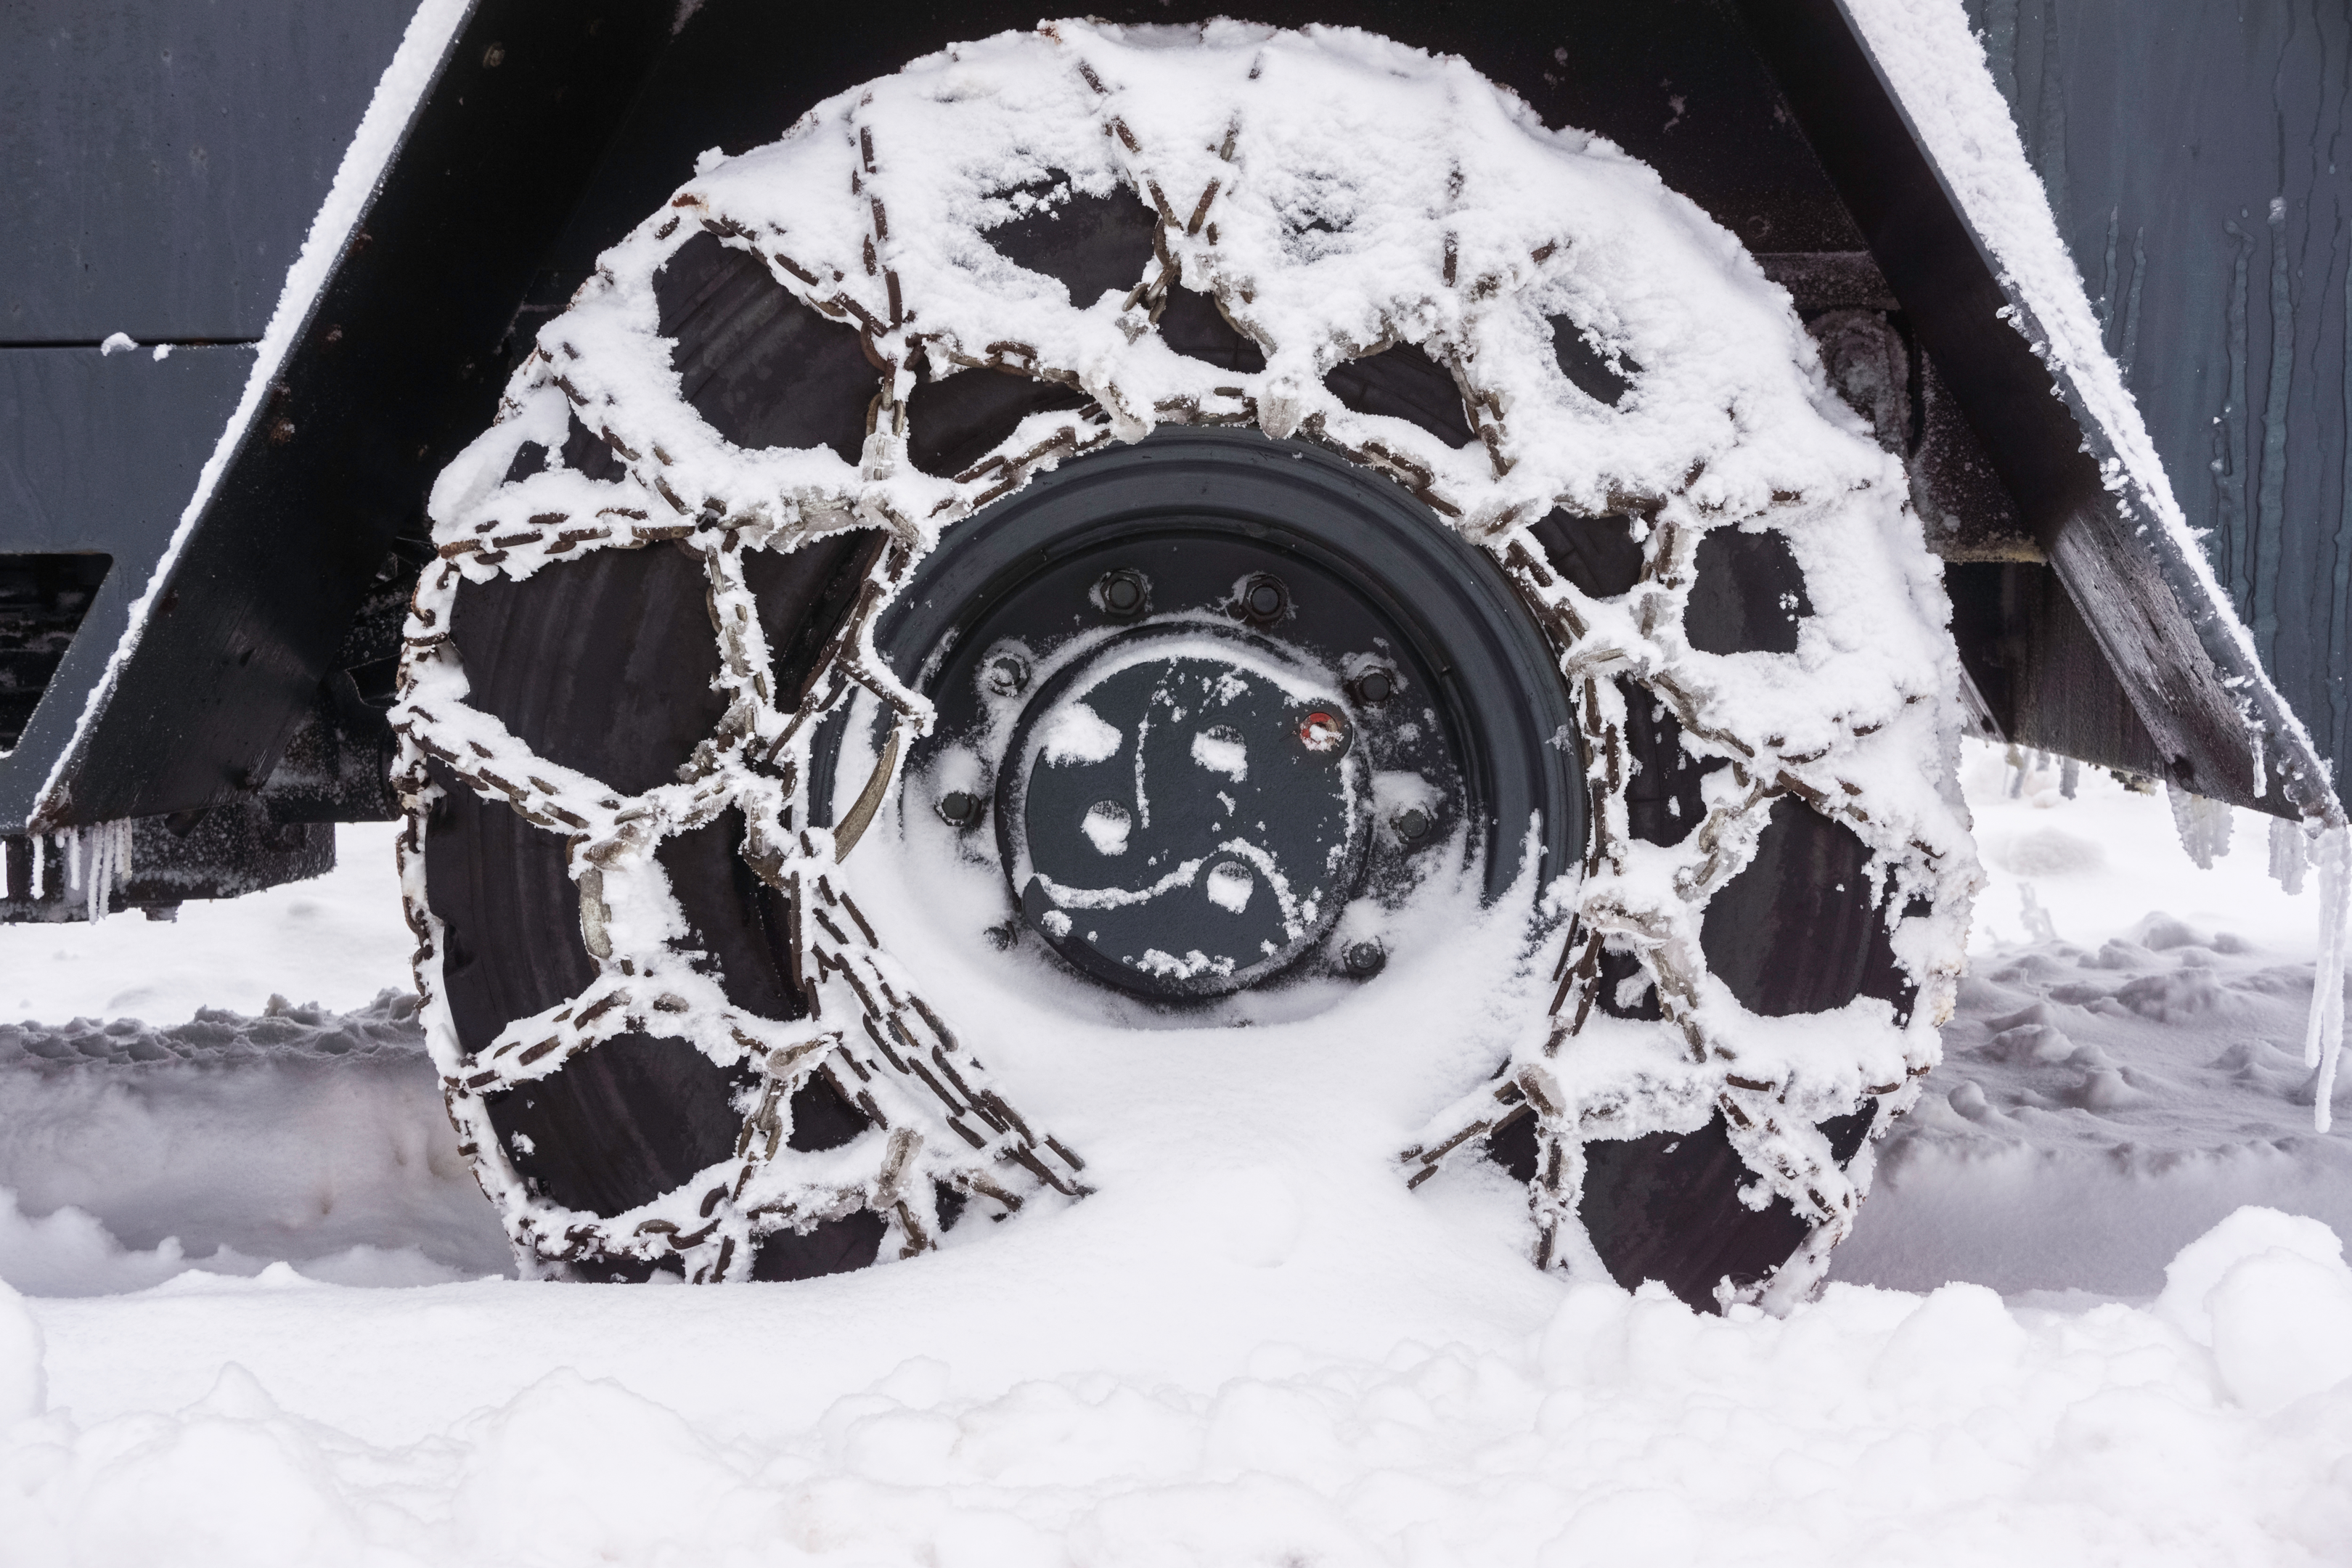 Prepare your snow tires with chains.